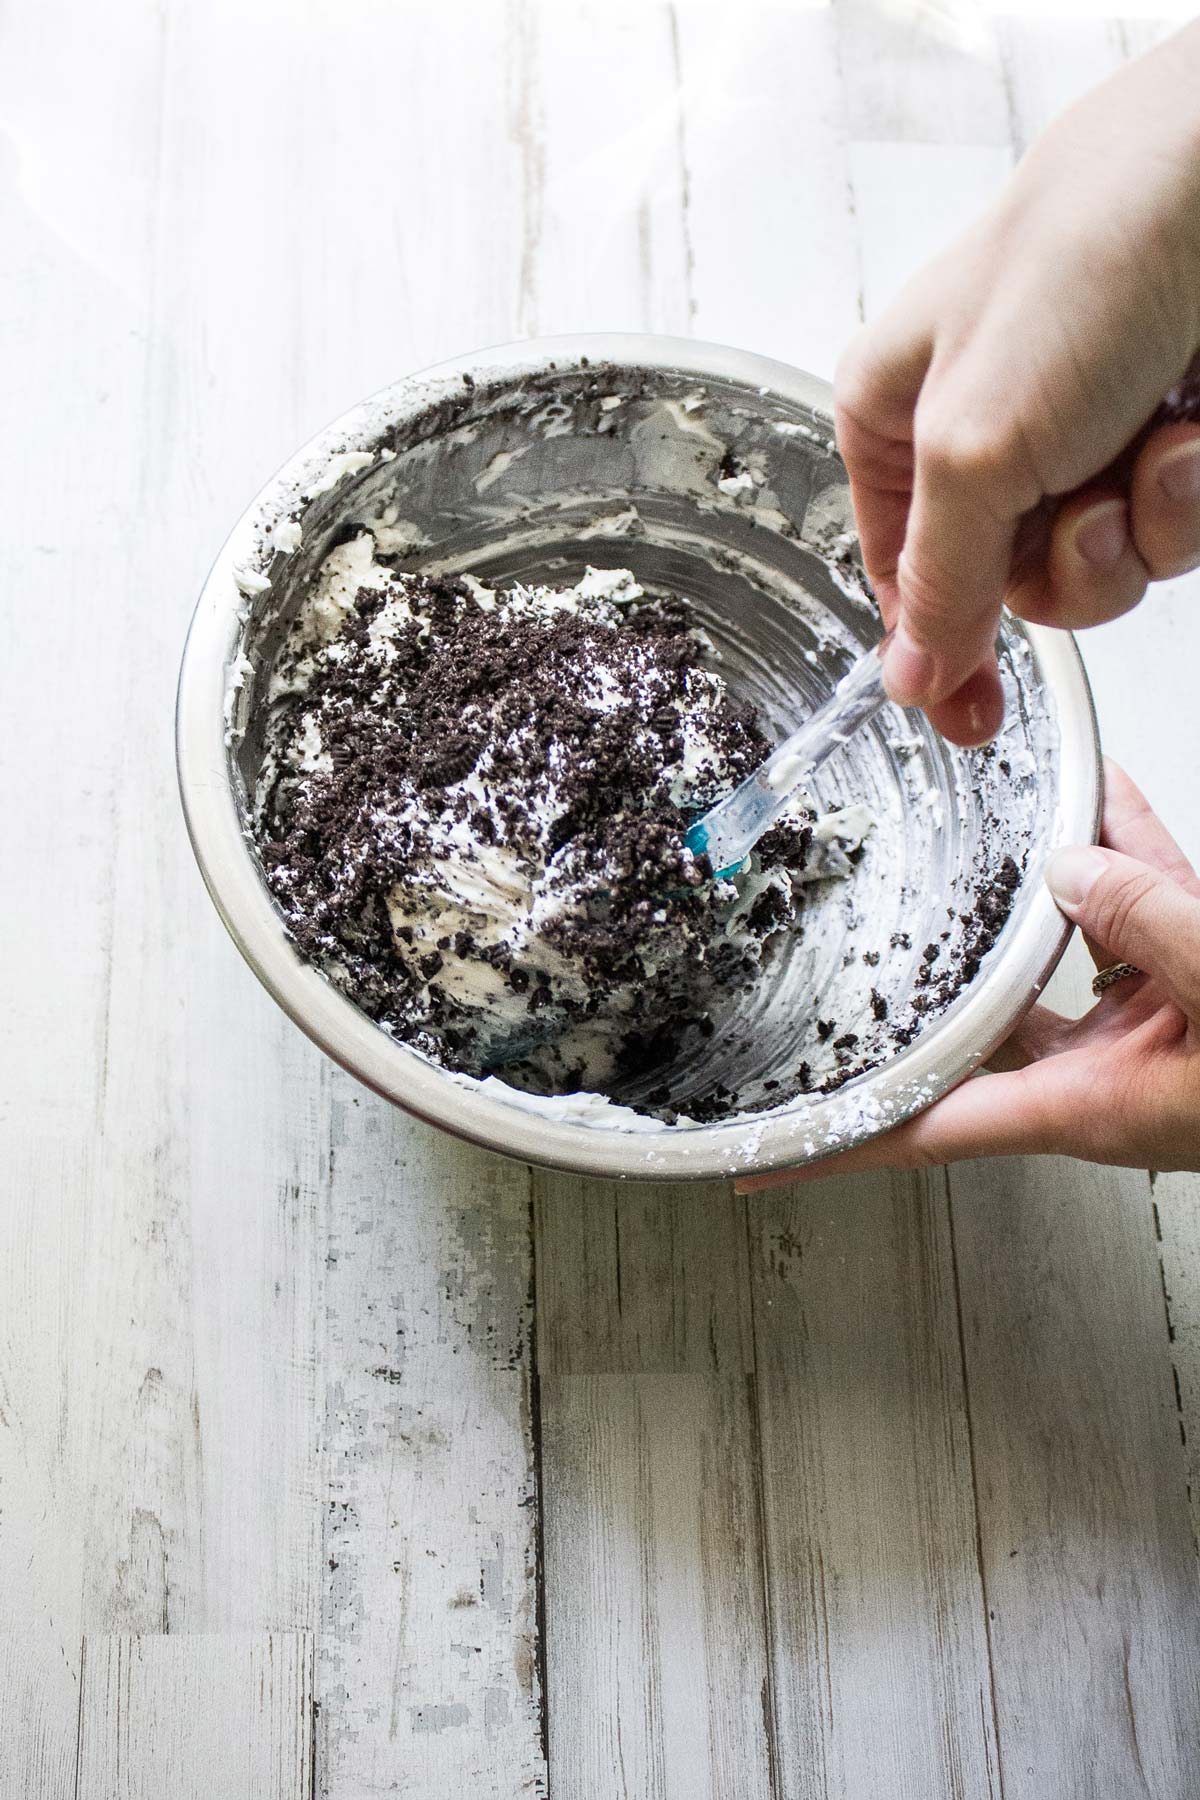 When people tell me that healthy tastes like cardboard and that gluten free surely can’t be fun to eat, I think of this easy gluten-free no-bake Oreo pie and laugh. Because no one will know this no bake dessert is gluten free, and it is most certainly FULL of chocolatey goodness flavor. You don’t even have to pre-heat the oven - just whip this together and you can have it ready for anytime! #glutenfreerecipes #dessertrecipes #nobakerecipes #recipeswaps